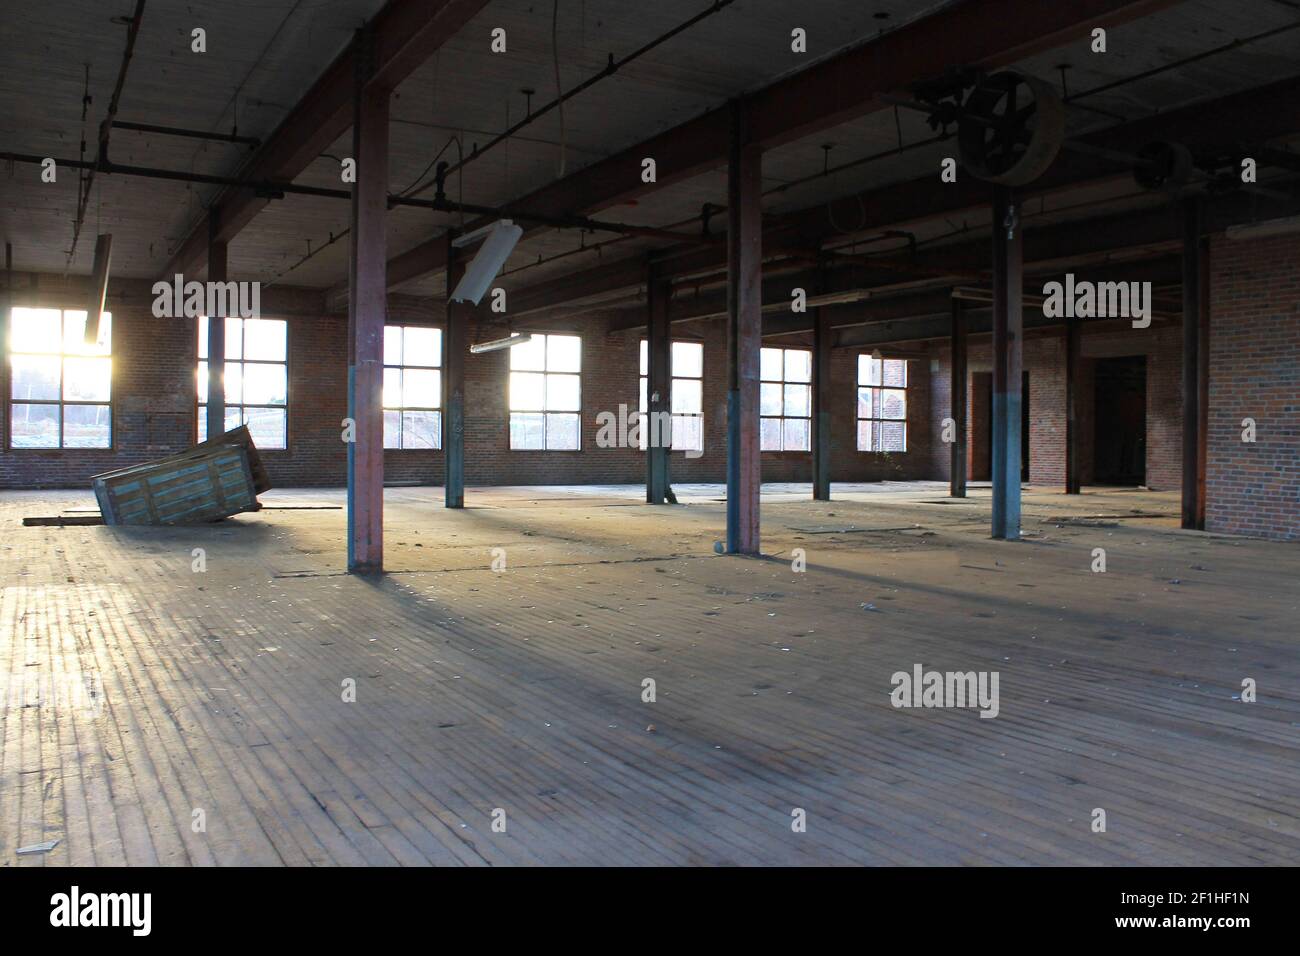 Interior view of an old, run-down, and abandoned factory building. Big, empty room with brick walls, exposed beams, and florescent light fixtures. Stock Photo